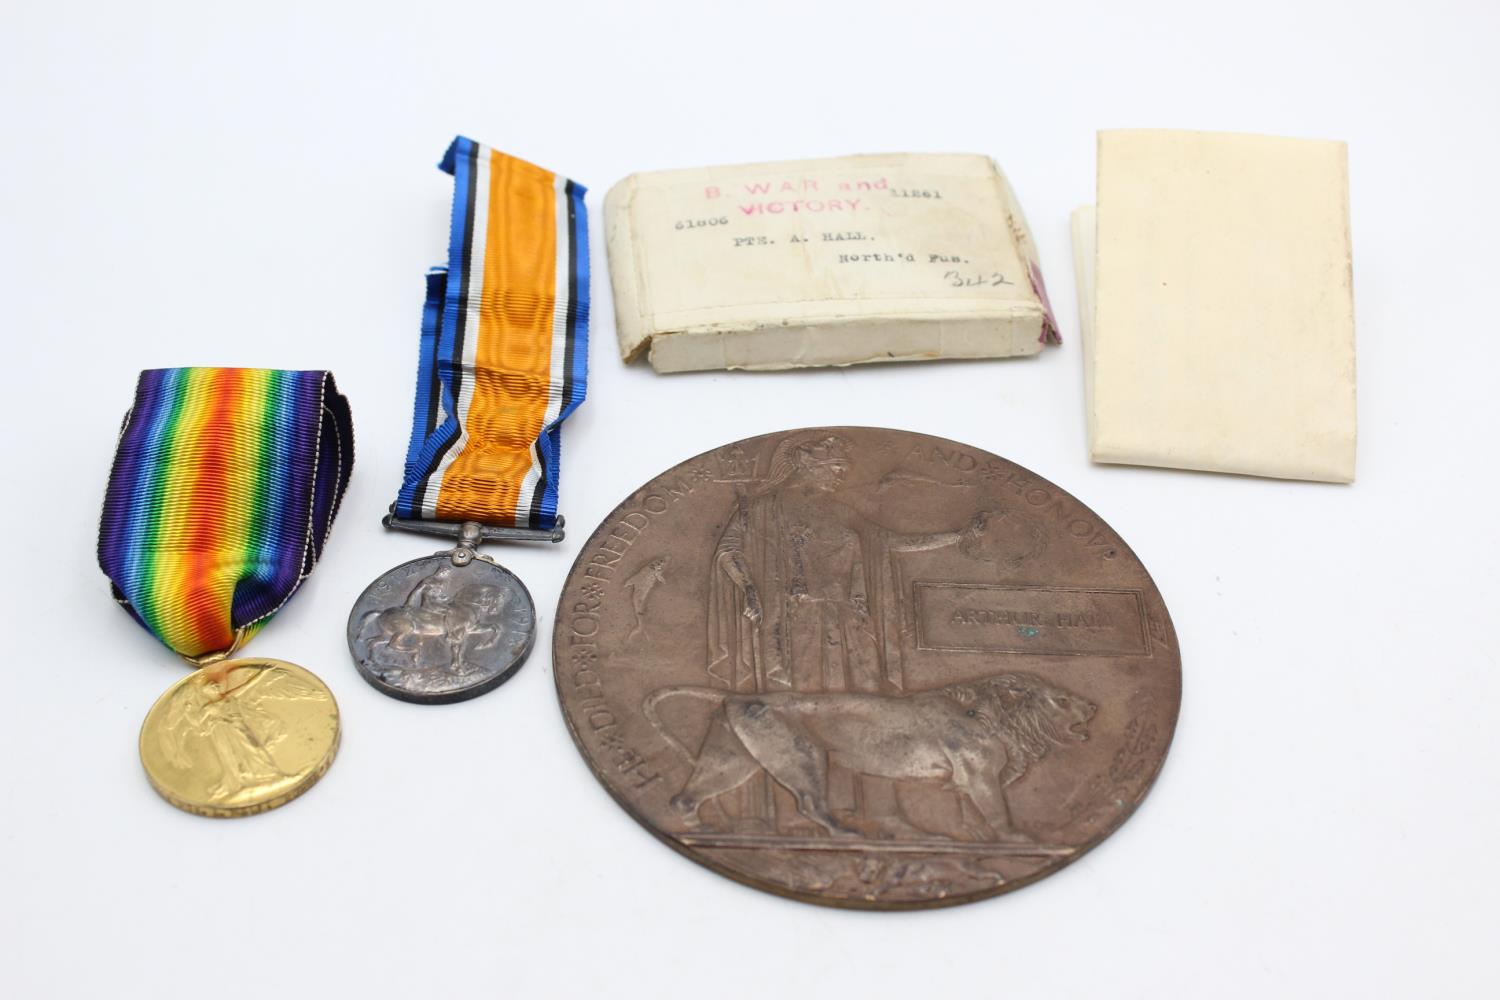 WW1 Named Medal Pair w/ Death Plaque Medals To 61806 PTE A.Hall - Northumberland Fusiliers, &